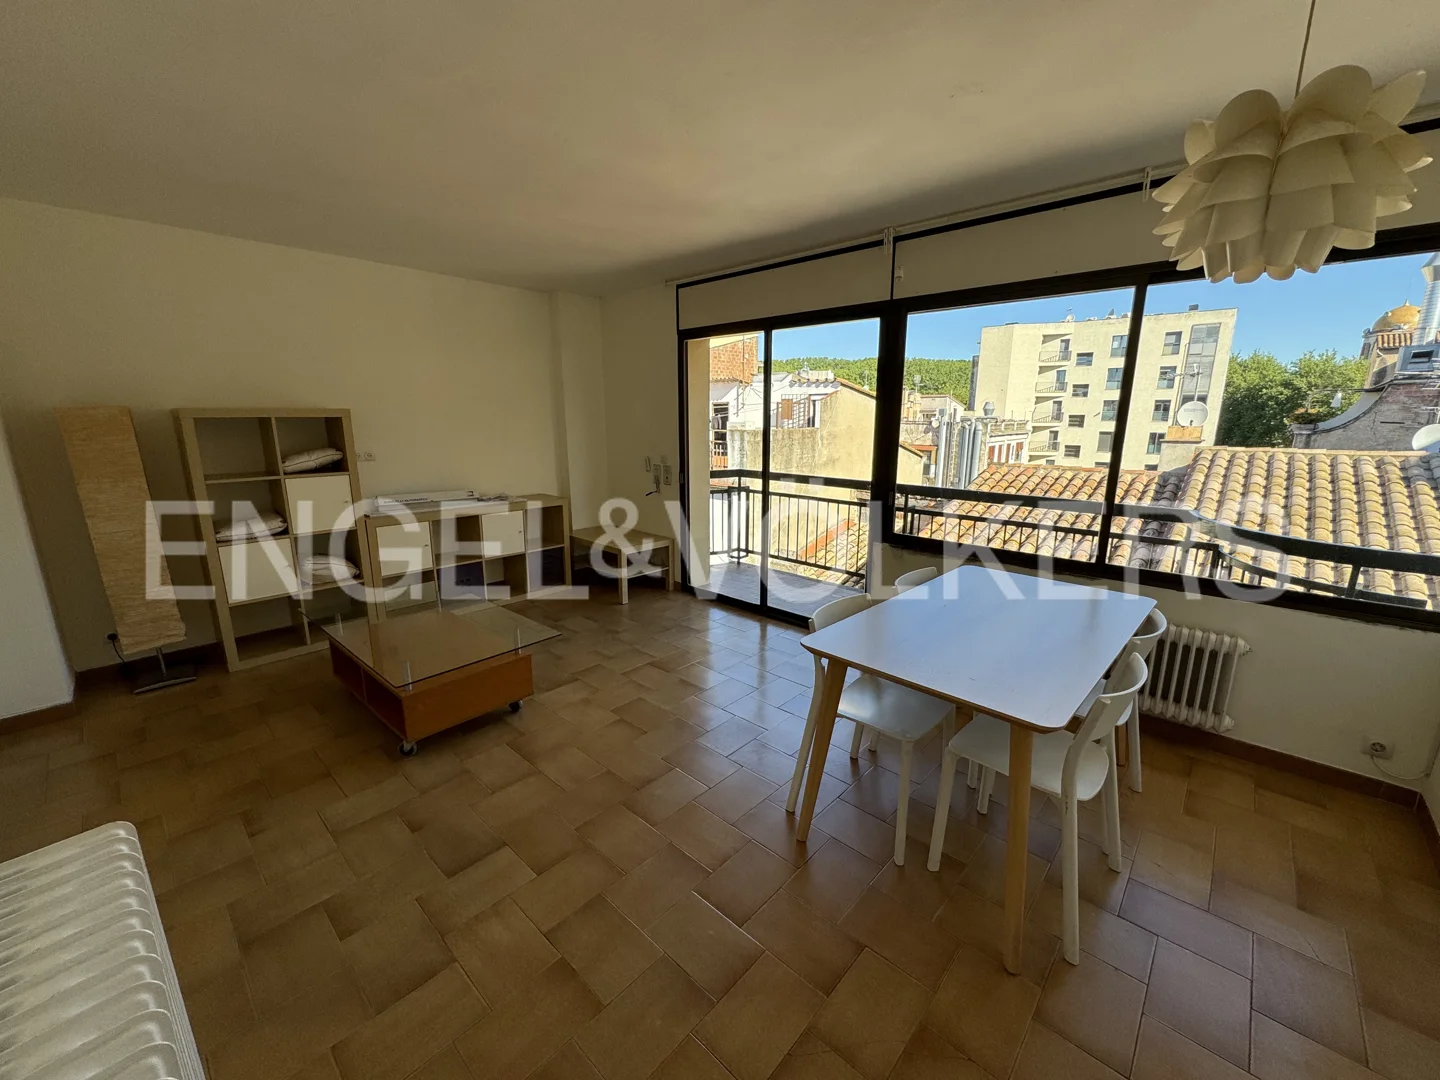 Apartment for rent in ideal location